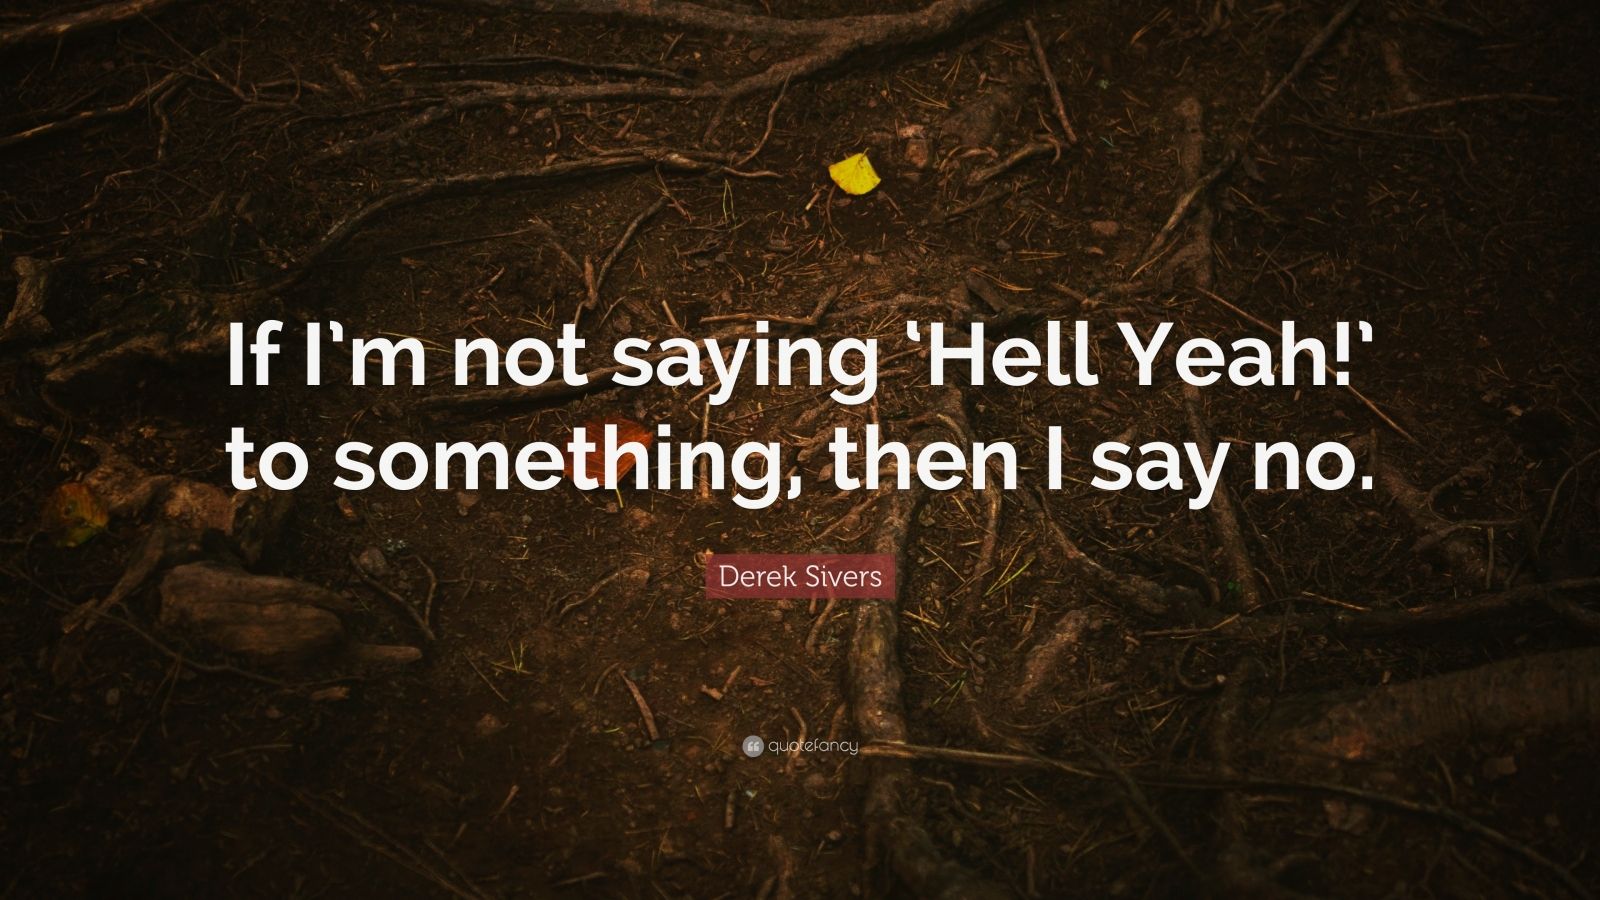 Just Say (Hell) No by Rosalind James